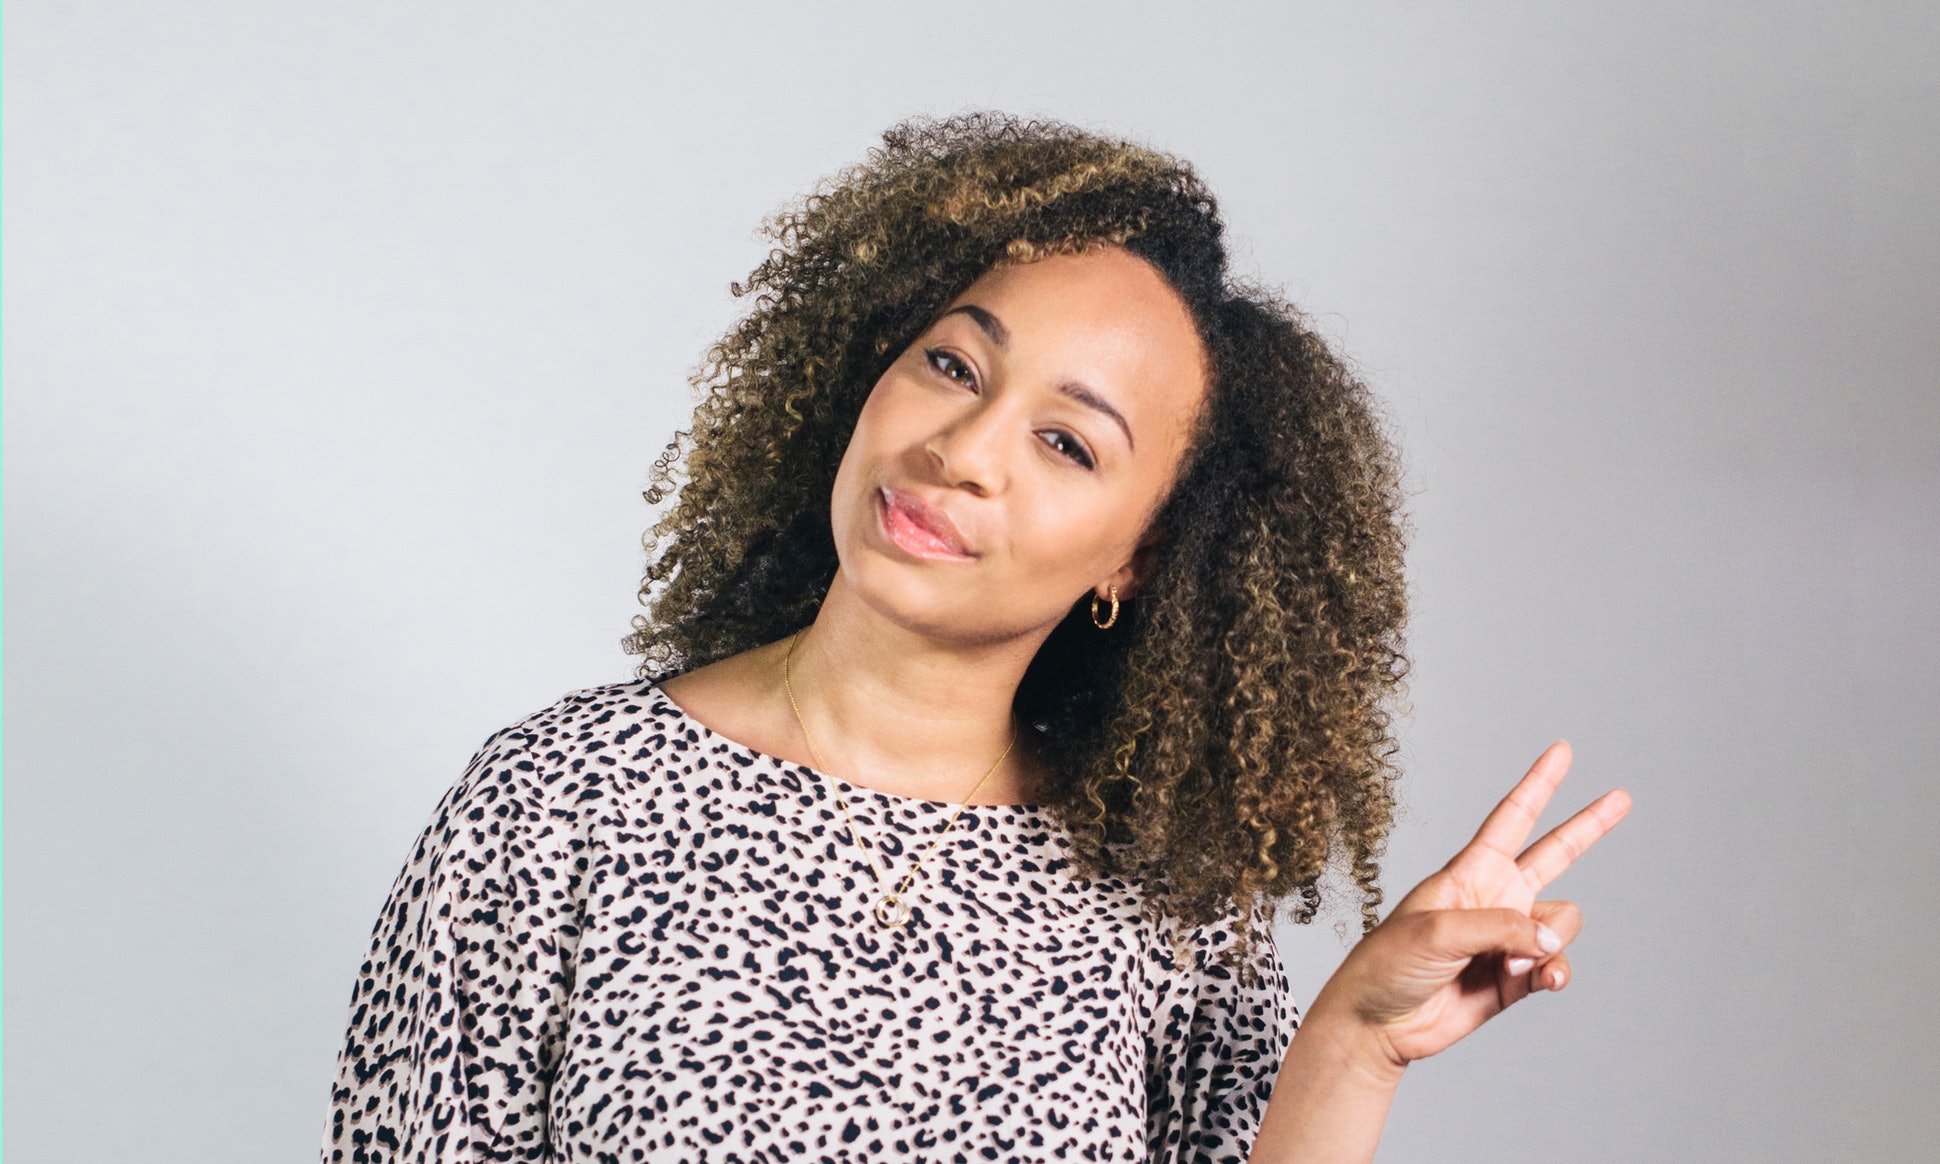 How ‘Blavity’ Co-Founder Morgan DeBaun Became One Of The Most Important Women In Silicon Valley